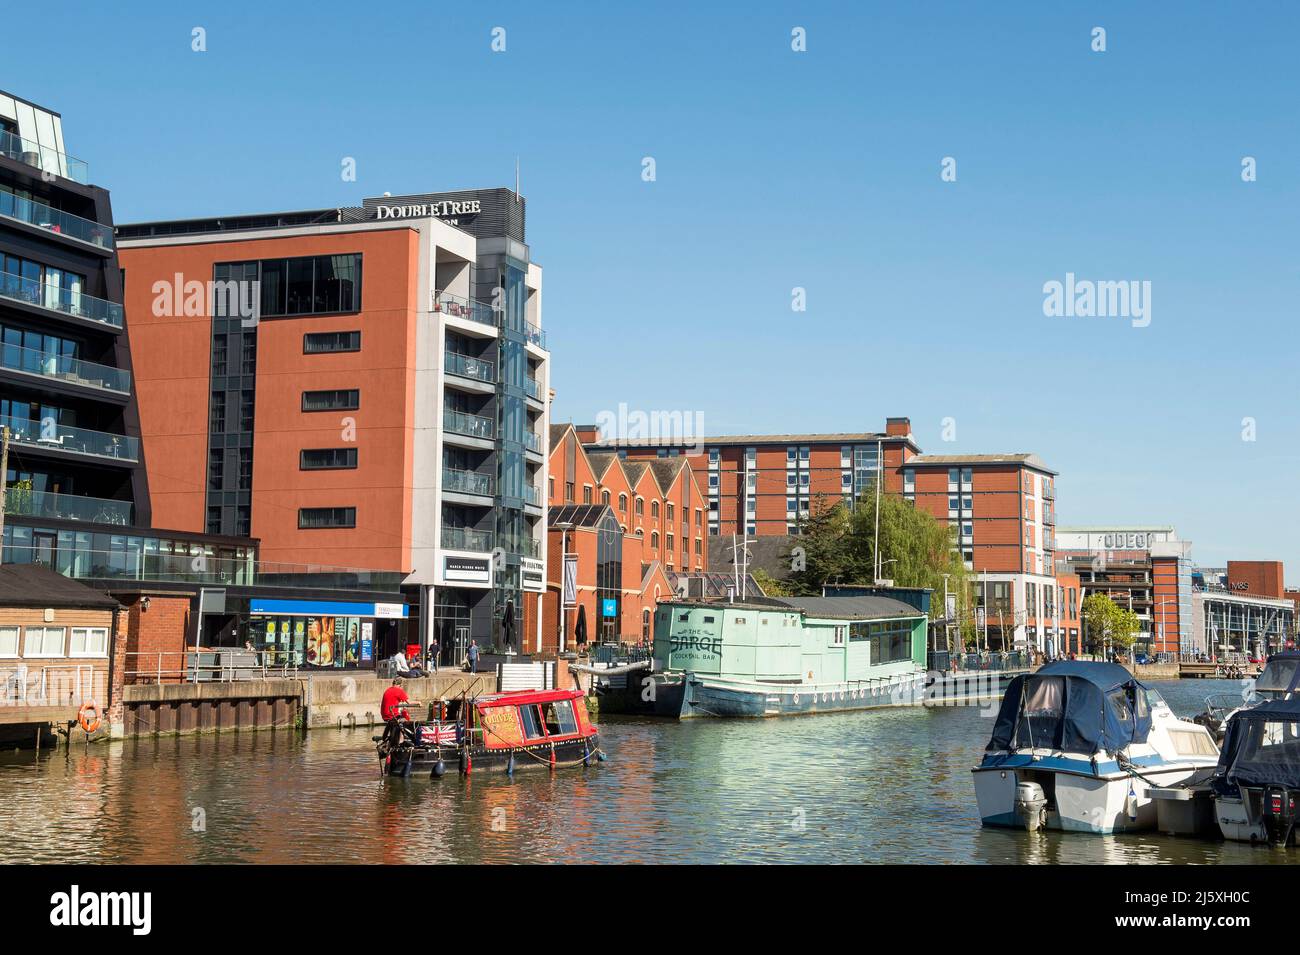 Lincoln, an historic  cathedral city in the county of Lincolnshire, UK.The picture shows the city's waterfront - Brayford Wharf - including boats, re Stock Photo